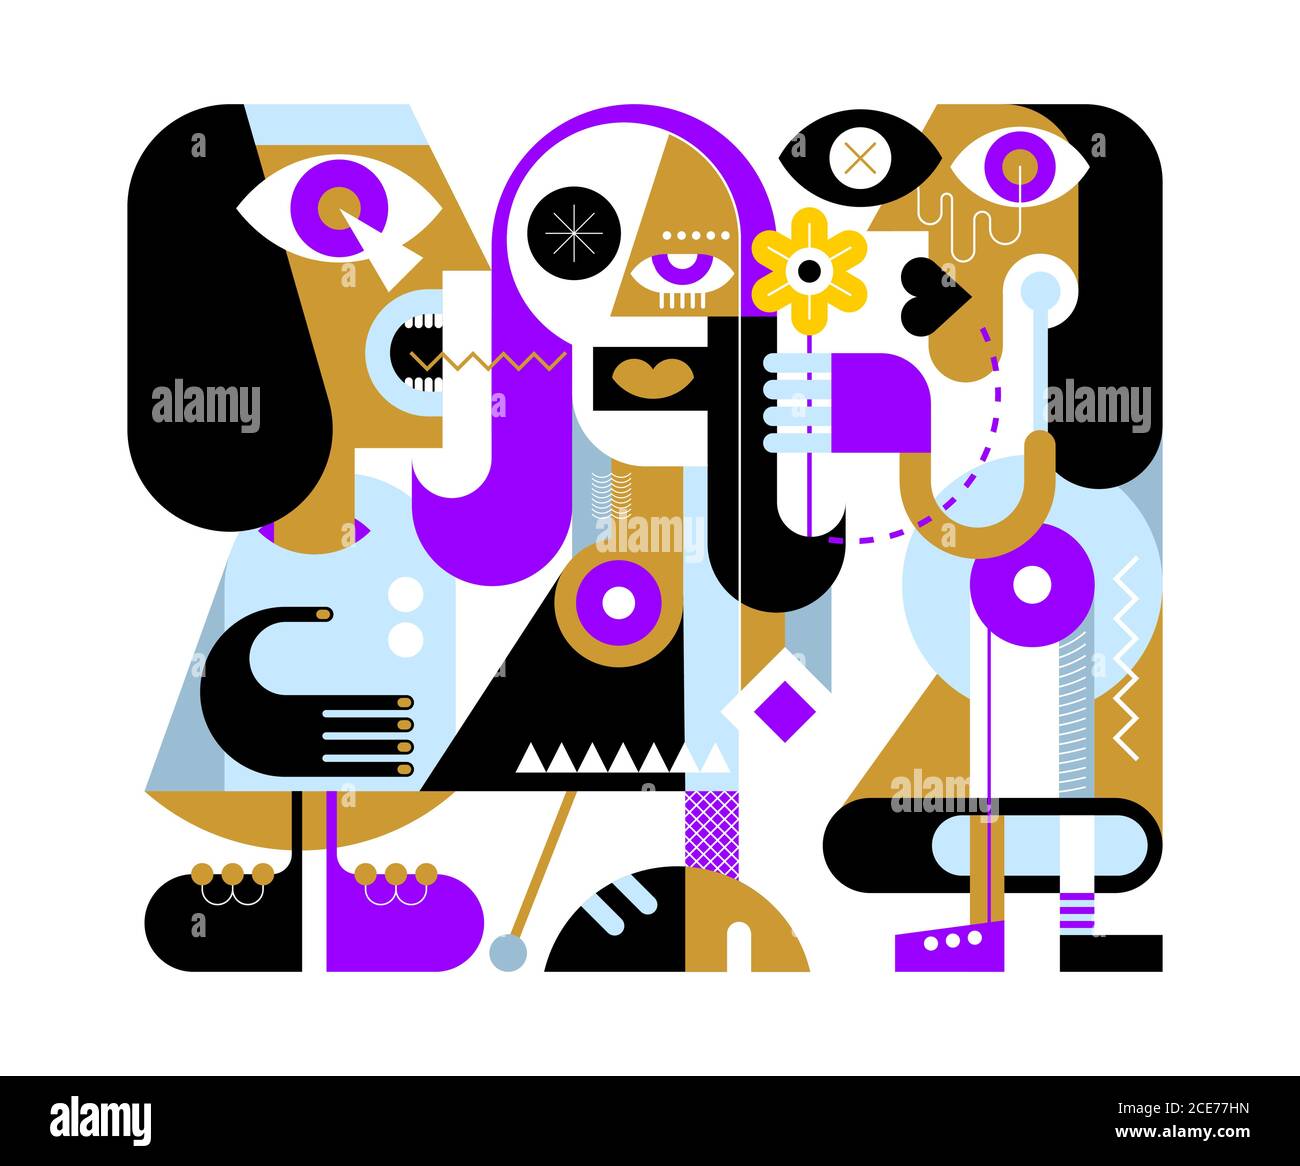 A woman gives a flower to her friend. A man nearby screams and shows aggression. Love Triangle modern abstract art vector illustration. Stock Vector